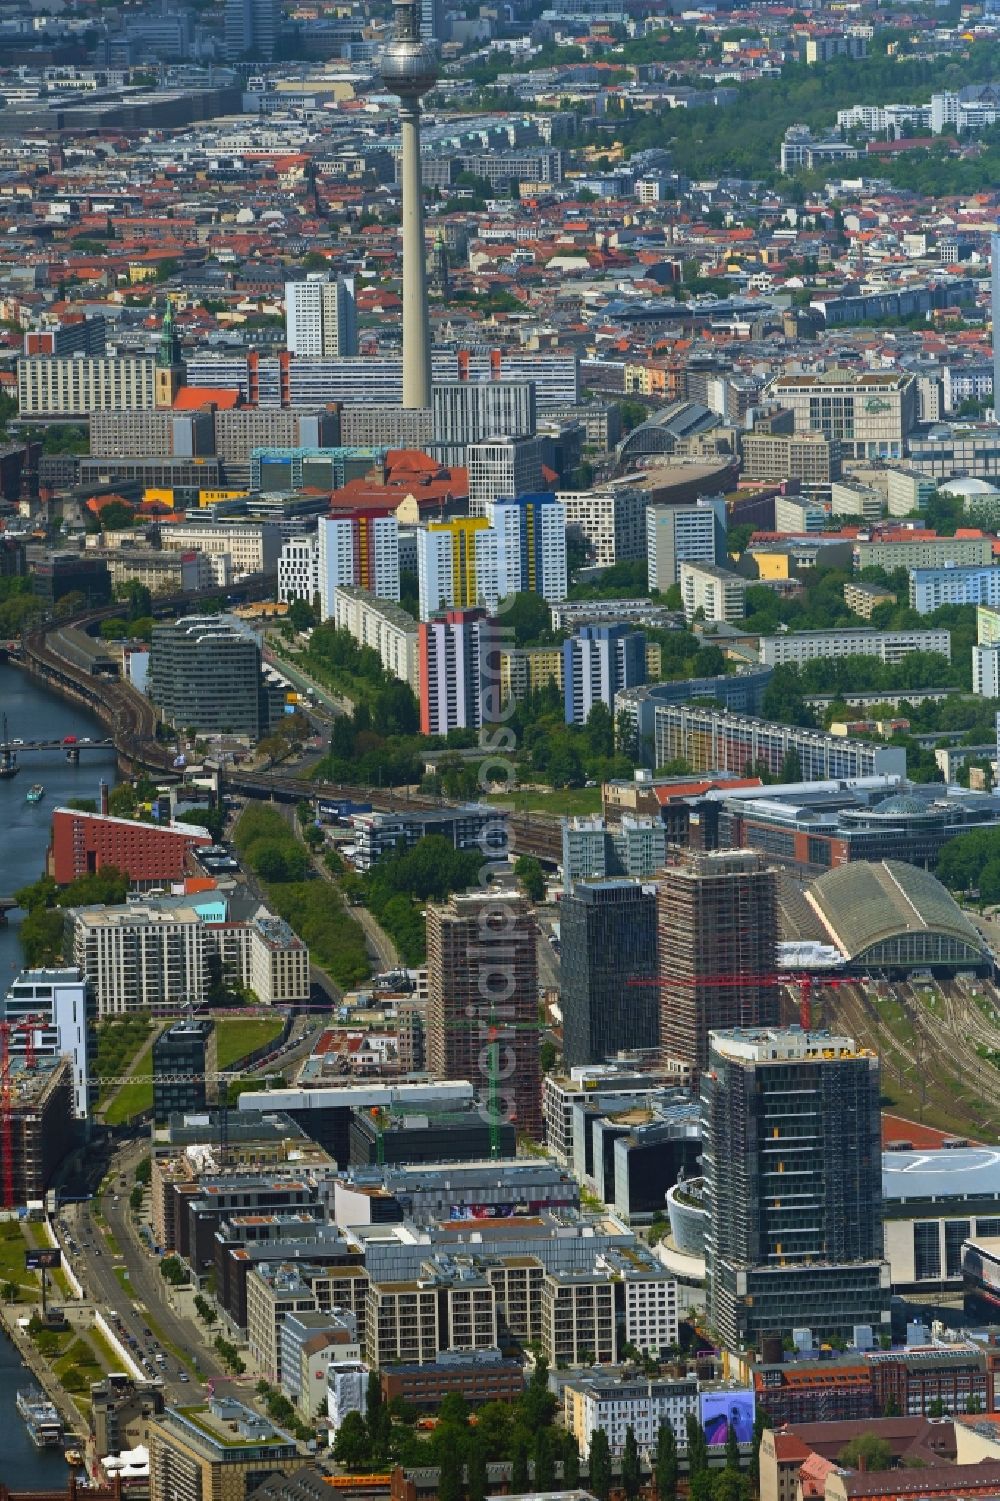 Berlin from the bird's eye view: City view Anschutz Areal on the river bank of Spree River in the district Friedrichshain in Berlin, Germany